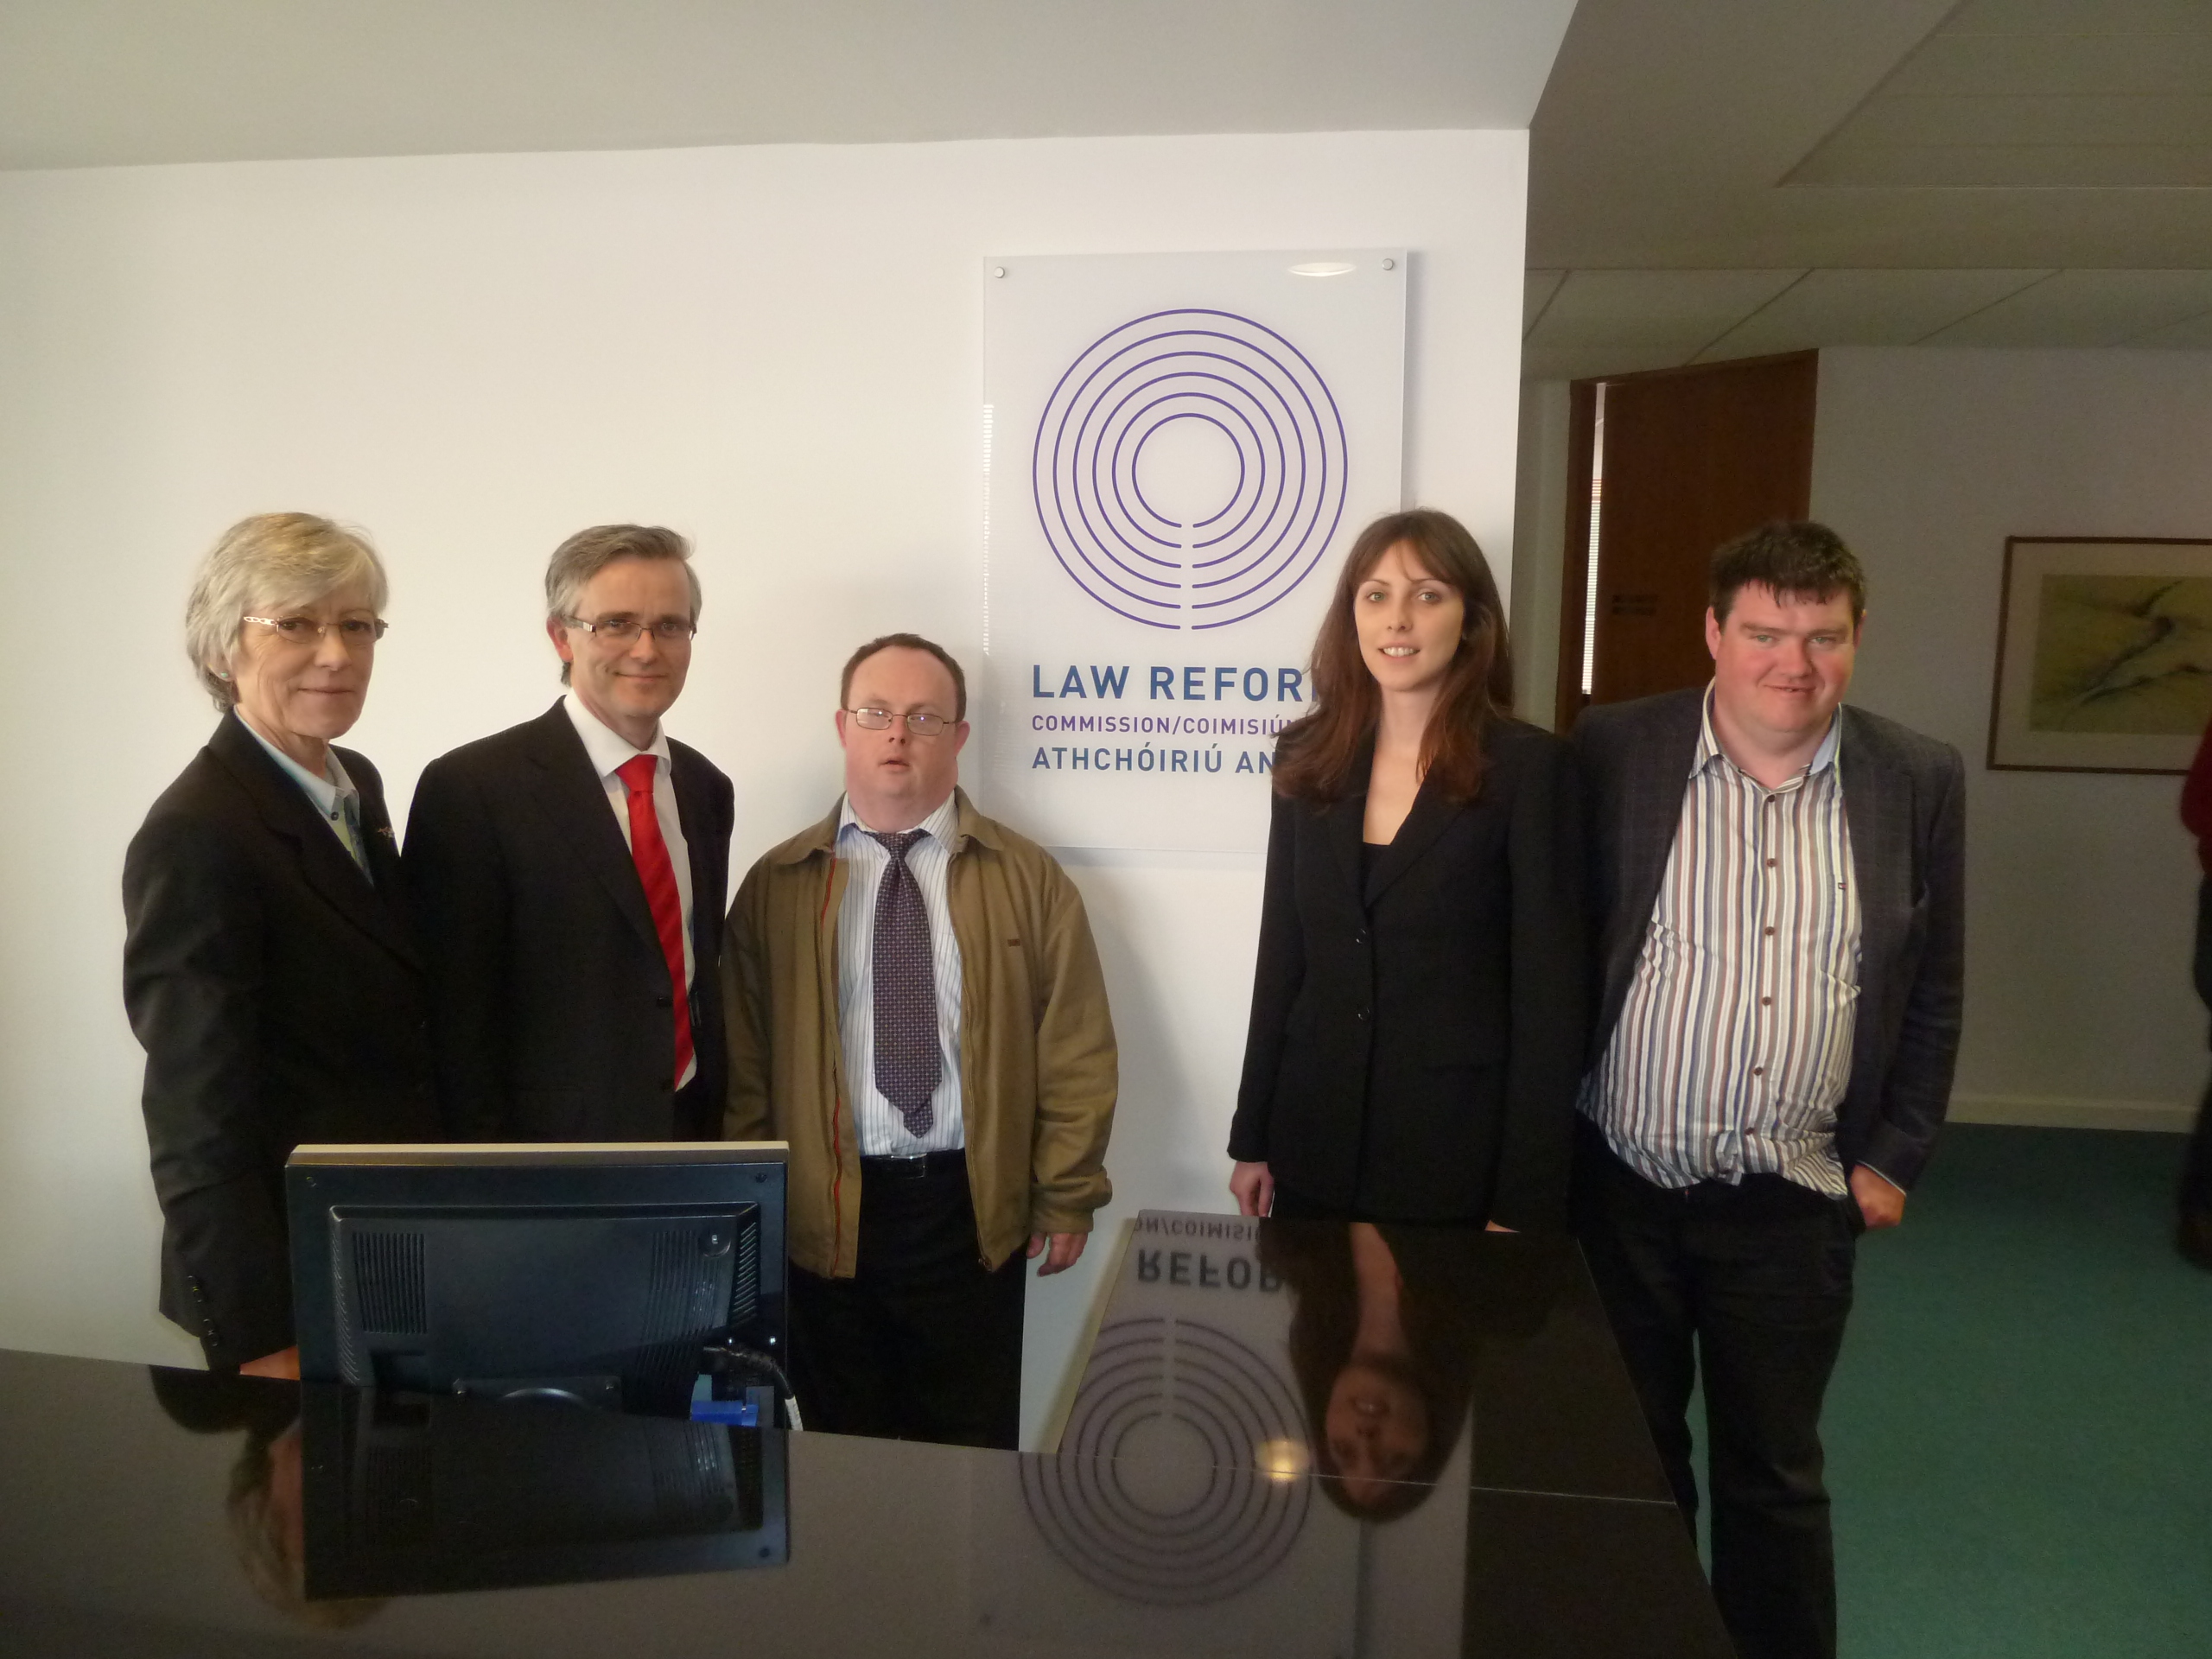 Members of the IRN and staff from the Law Reform Commission after the meeting.